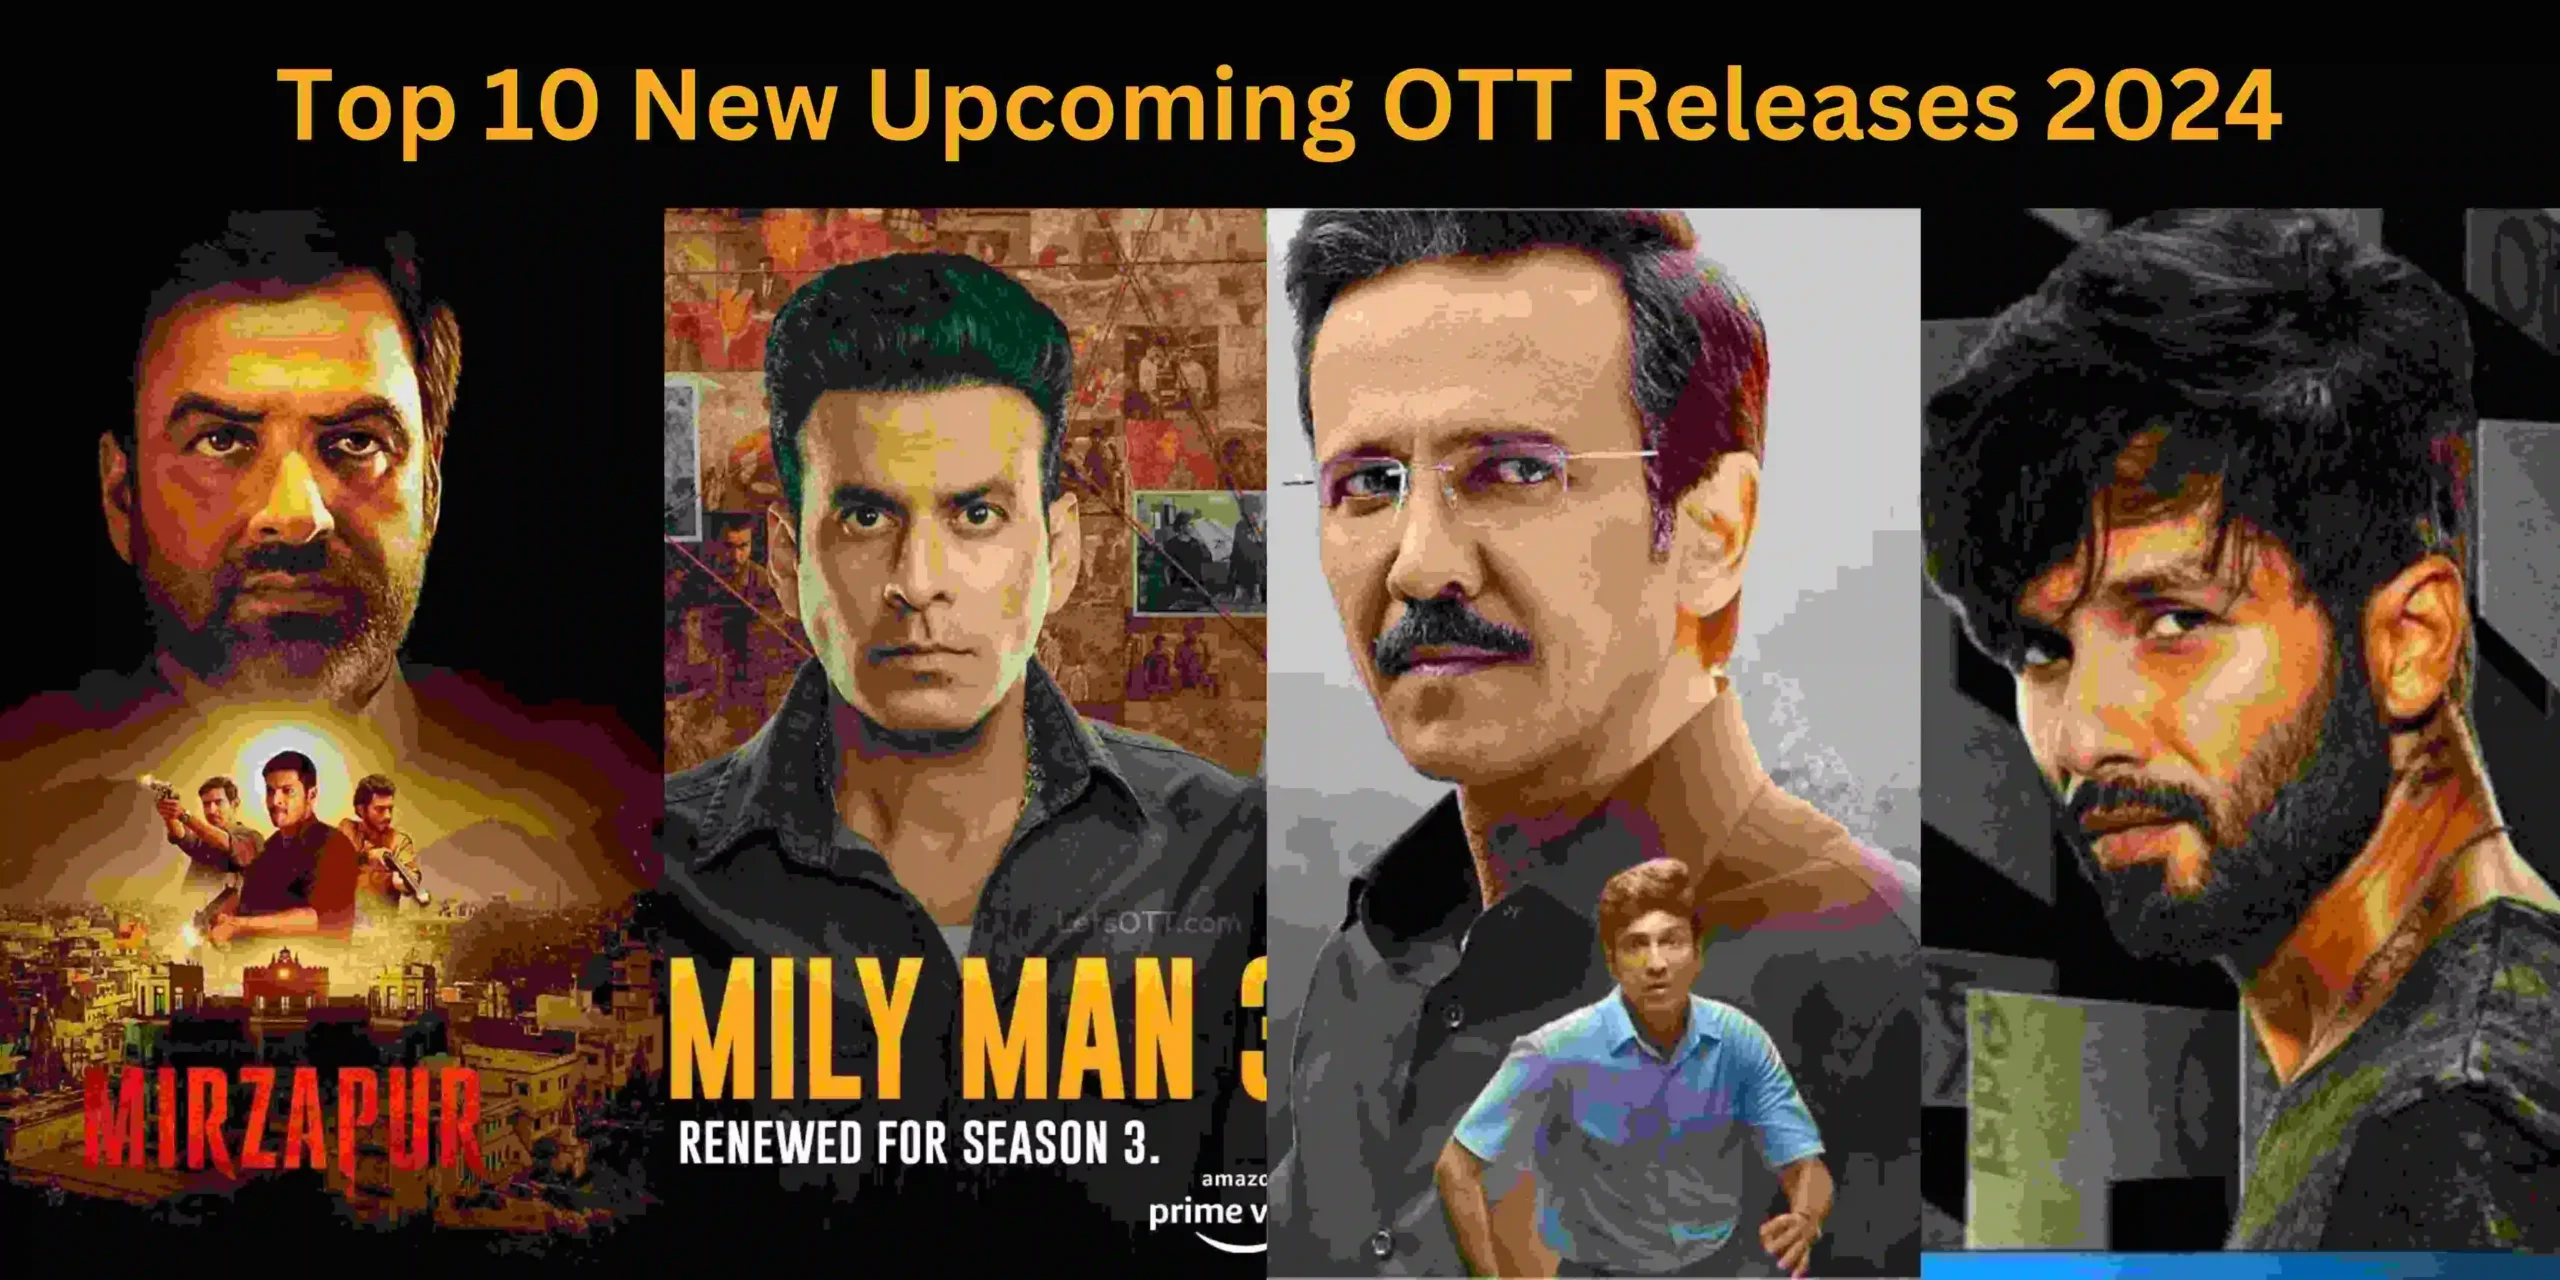 Top 10 New Upcoming OTT Releases 2024